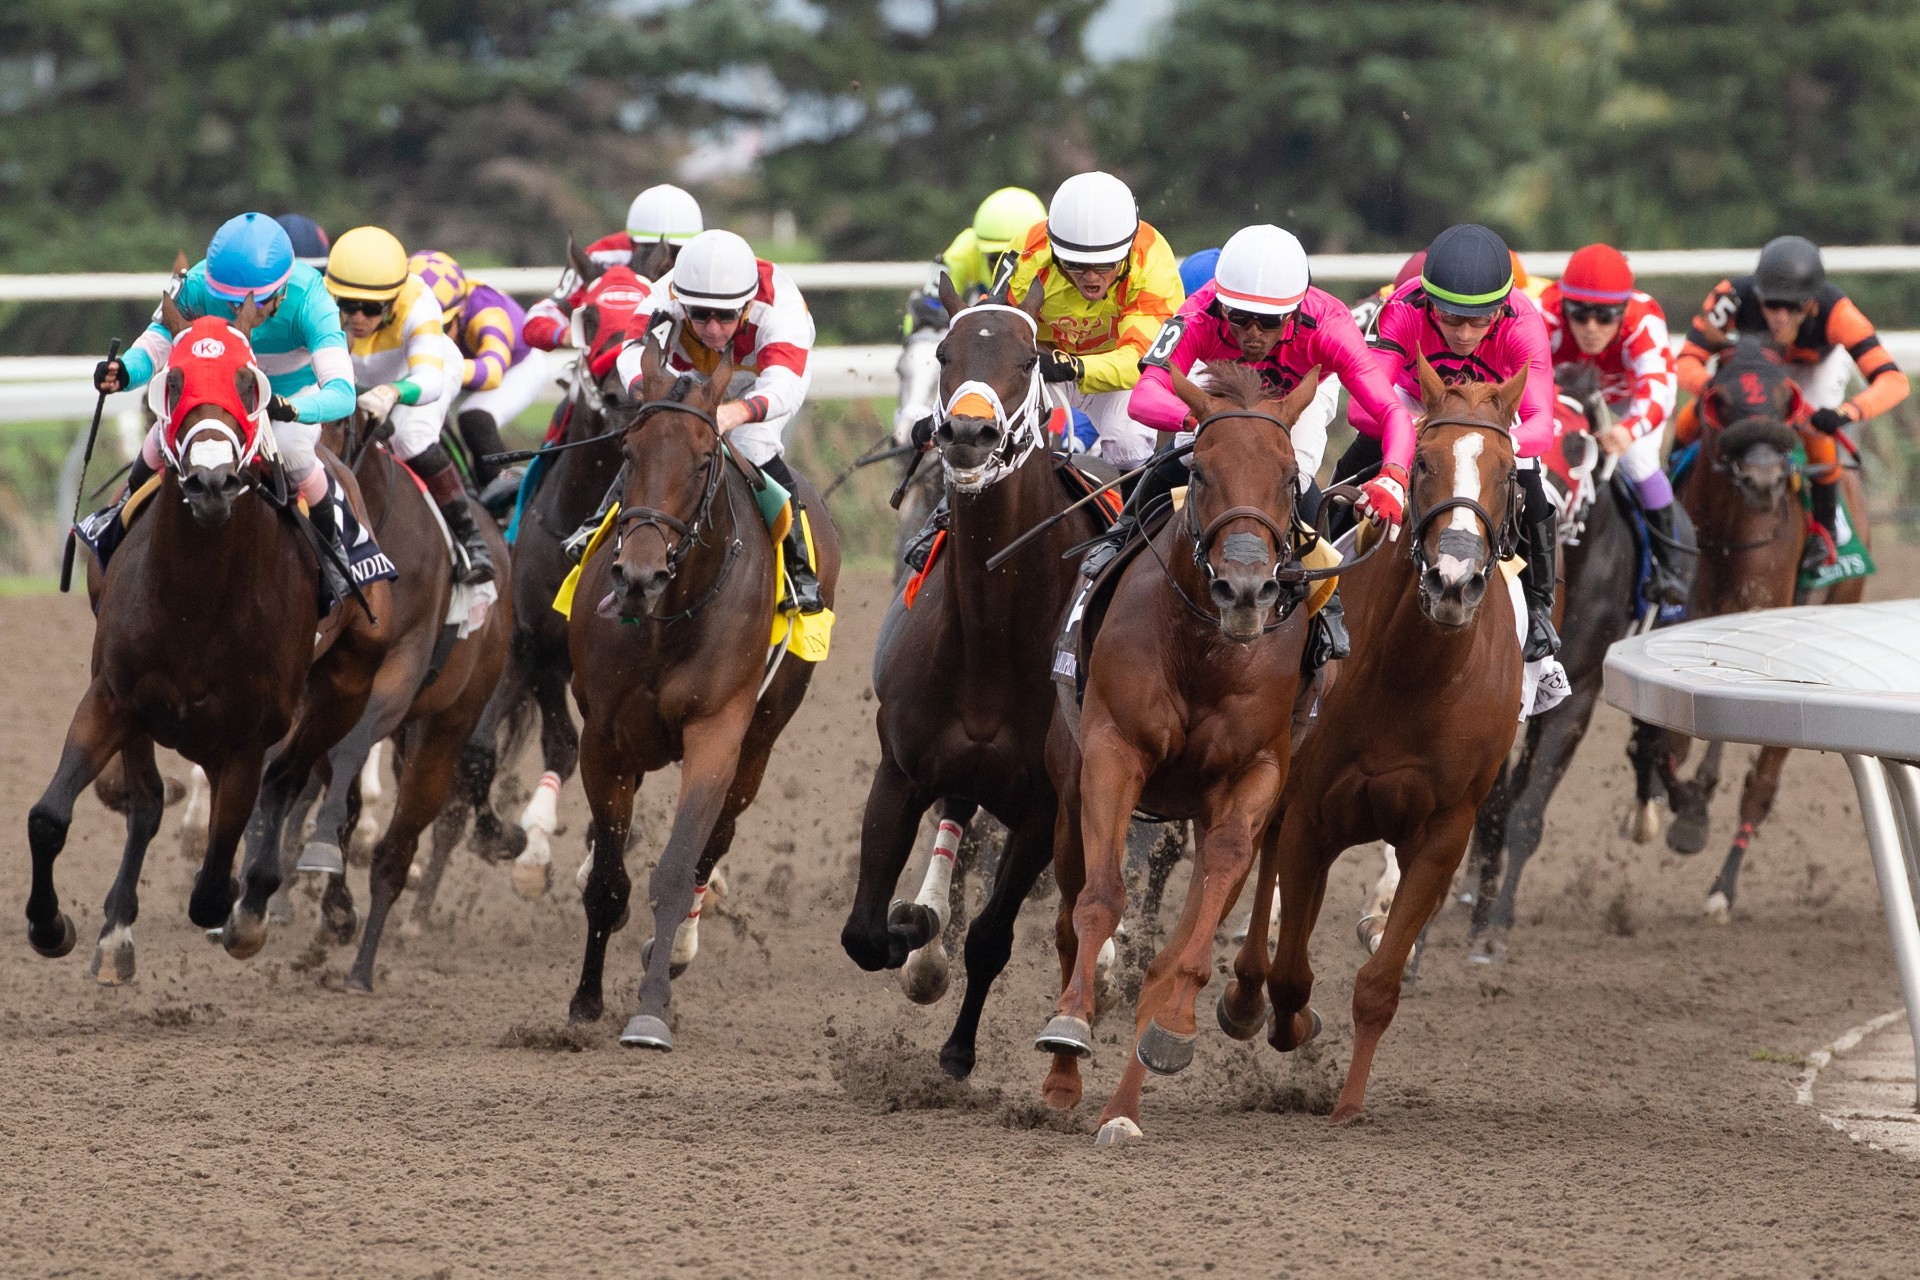 Woodbine 2023 Thoroughbred meet delivers strong results, but concerning industry trends loom